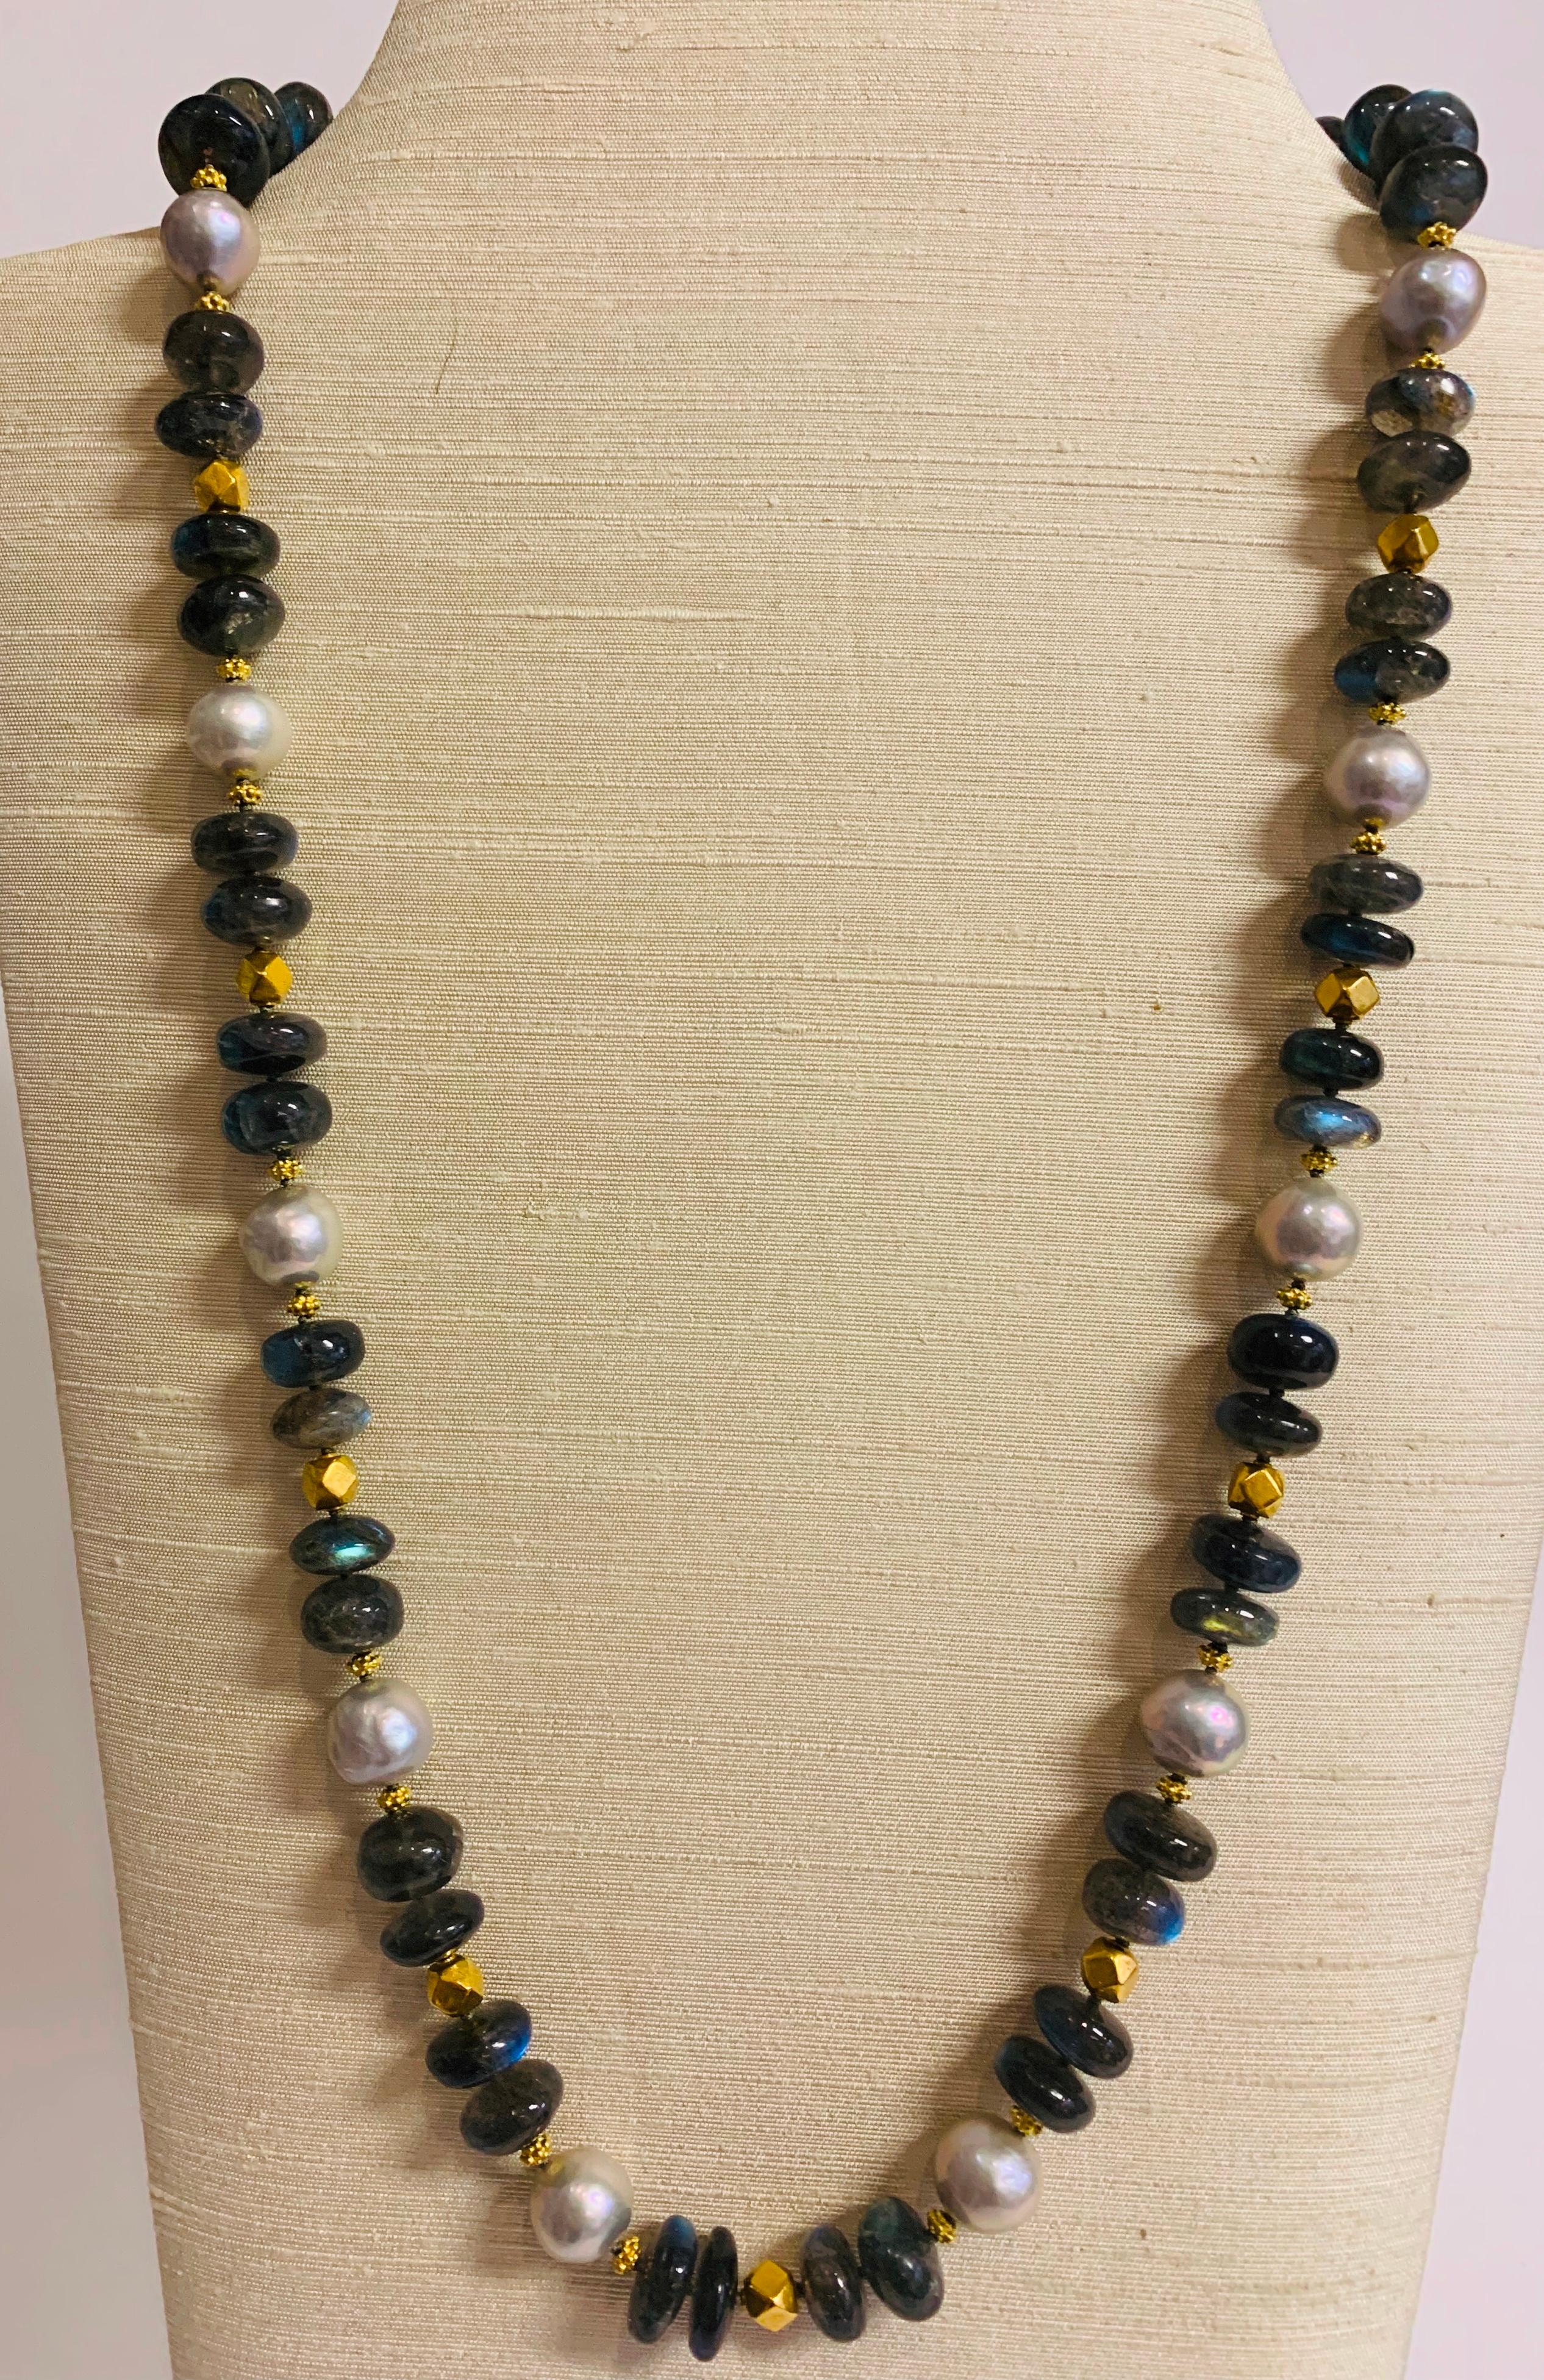 A wonderful necklace of multi-faceted reflective labradorite beads mixed with freshwater pearls and 18k gold beads to create a glamorous piece well suited to evening wear.

Designed by AMANDA CLARK for Altfield, our collection focuses on natures